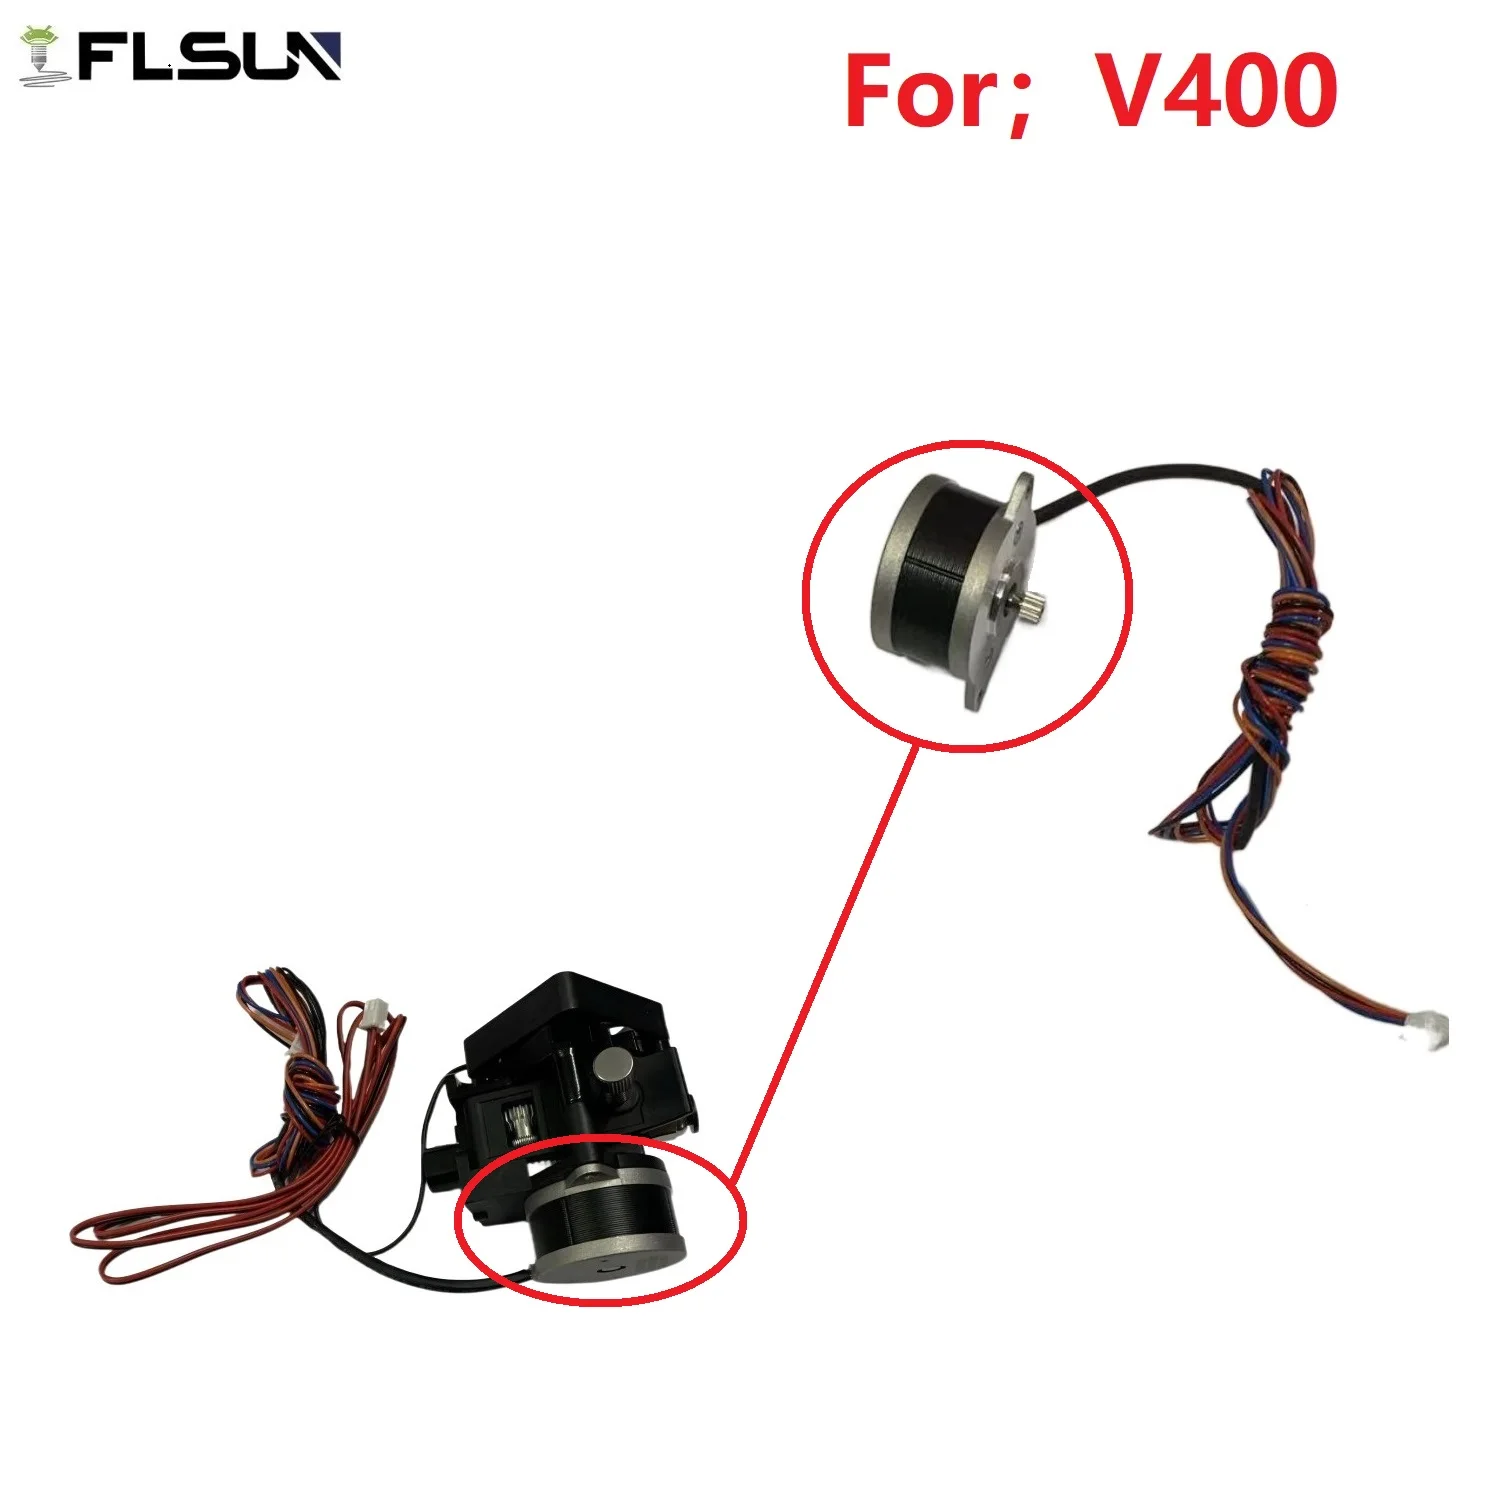 3D Printer Accessories FLSUN V400 Motor Original Parts Extrusion Head With Motor The Latest Product Wholesale flsun v400 3d printer aceesories auto leveling speed printing extruder original brand new